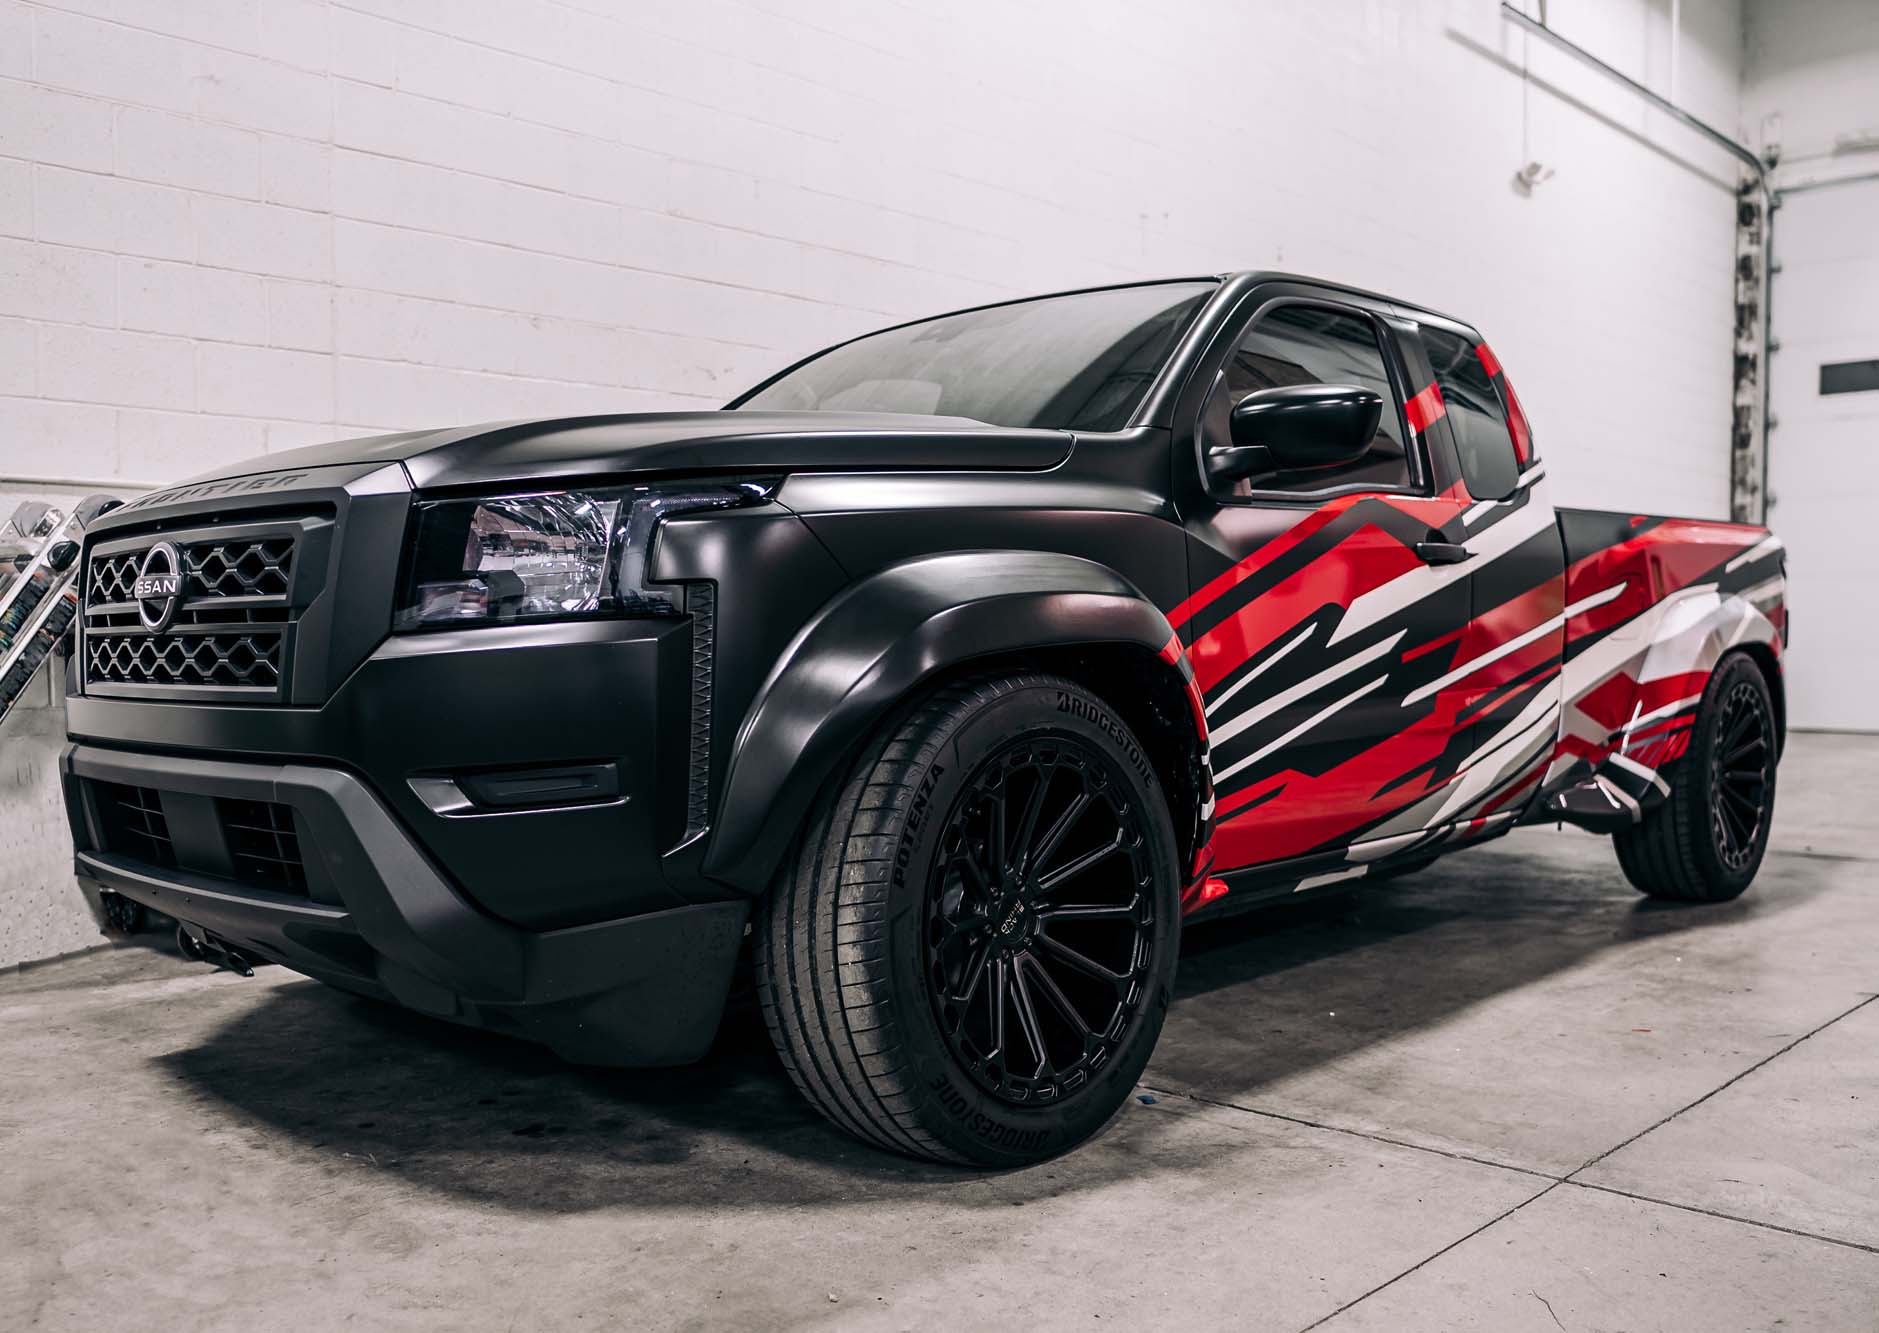 Content creator and automotive influencer Christina Roki created a lowered, street truck-style project based on a 2022 Frontier King Cab SV. Roki takes the truck in a bold direction with a custom wide body kit from Performance Lab Detroit, along with a lowered suspension and other modifications, all recalling the look of the “mini truckin’” style of the past.